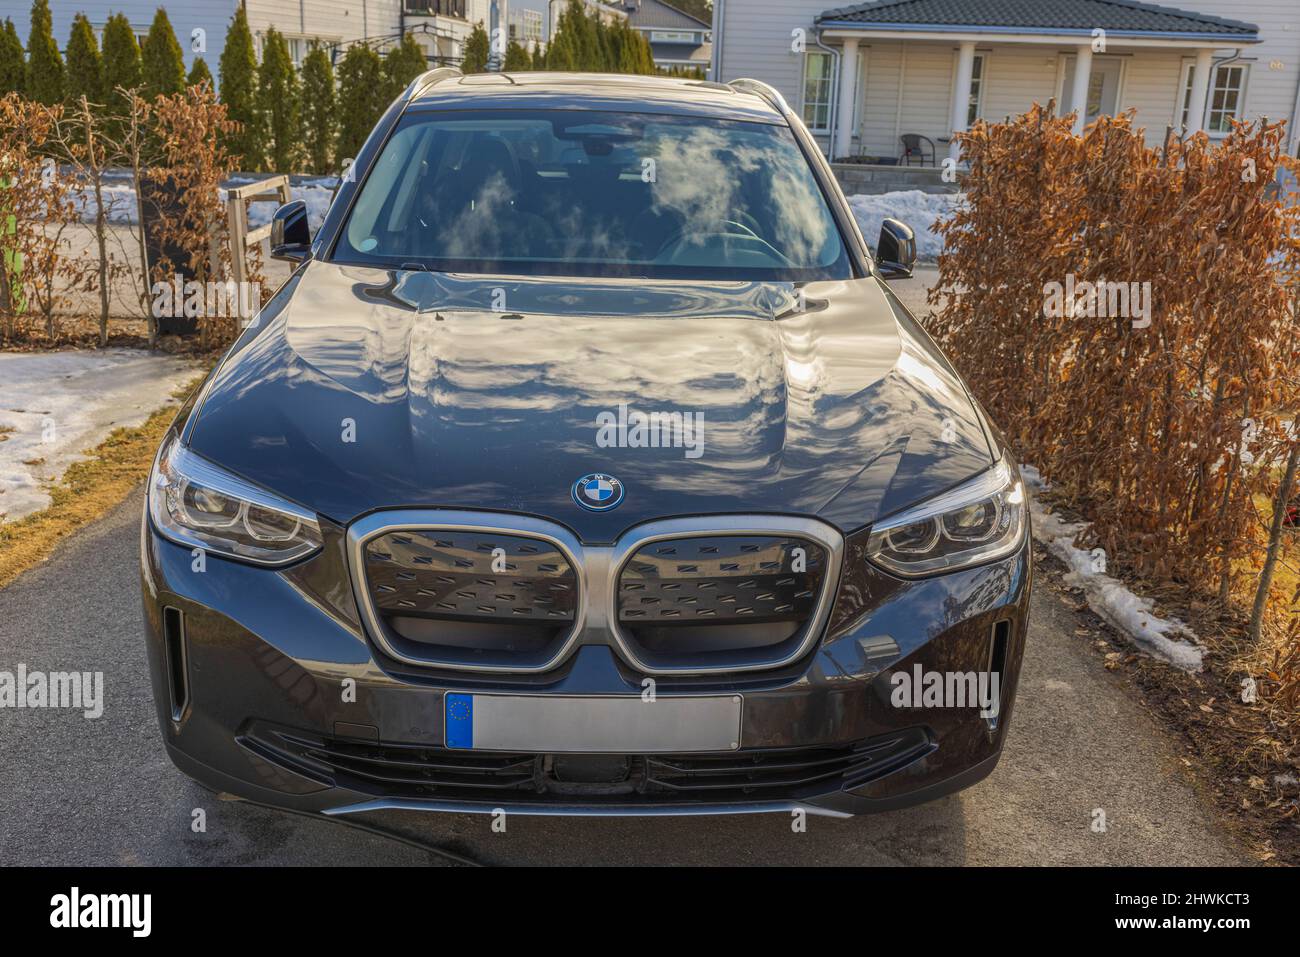 BMW M5, model year 2005-, black, driving, side view, City Stock Photo -  Alamy